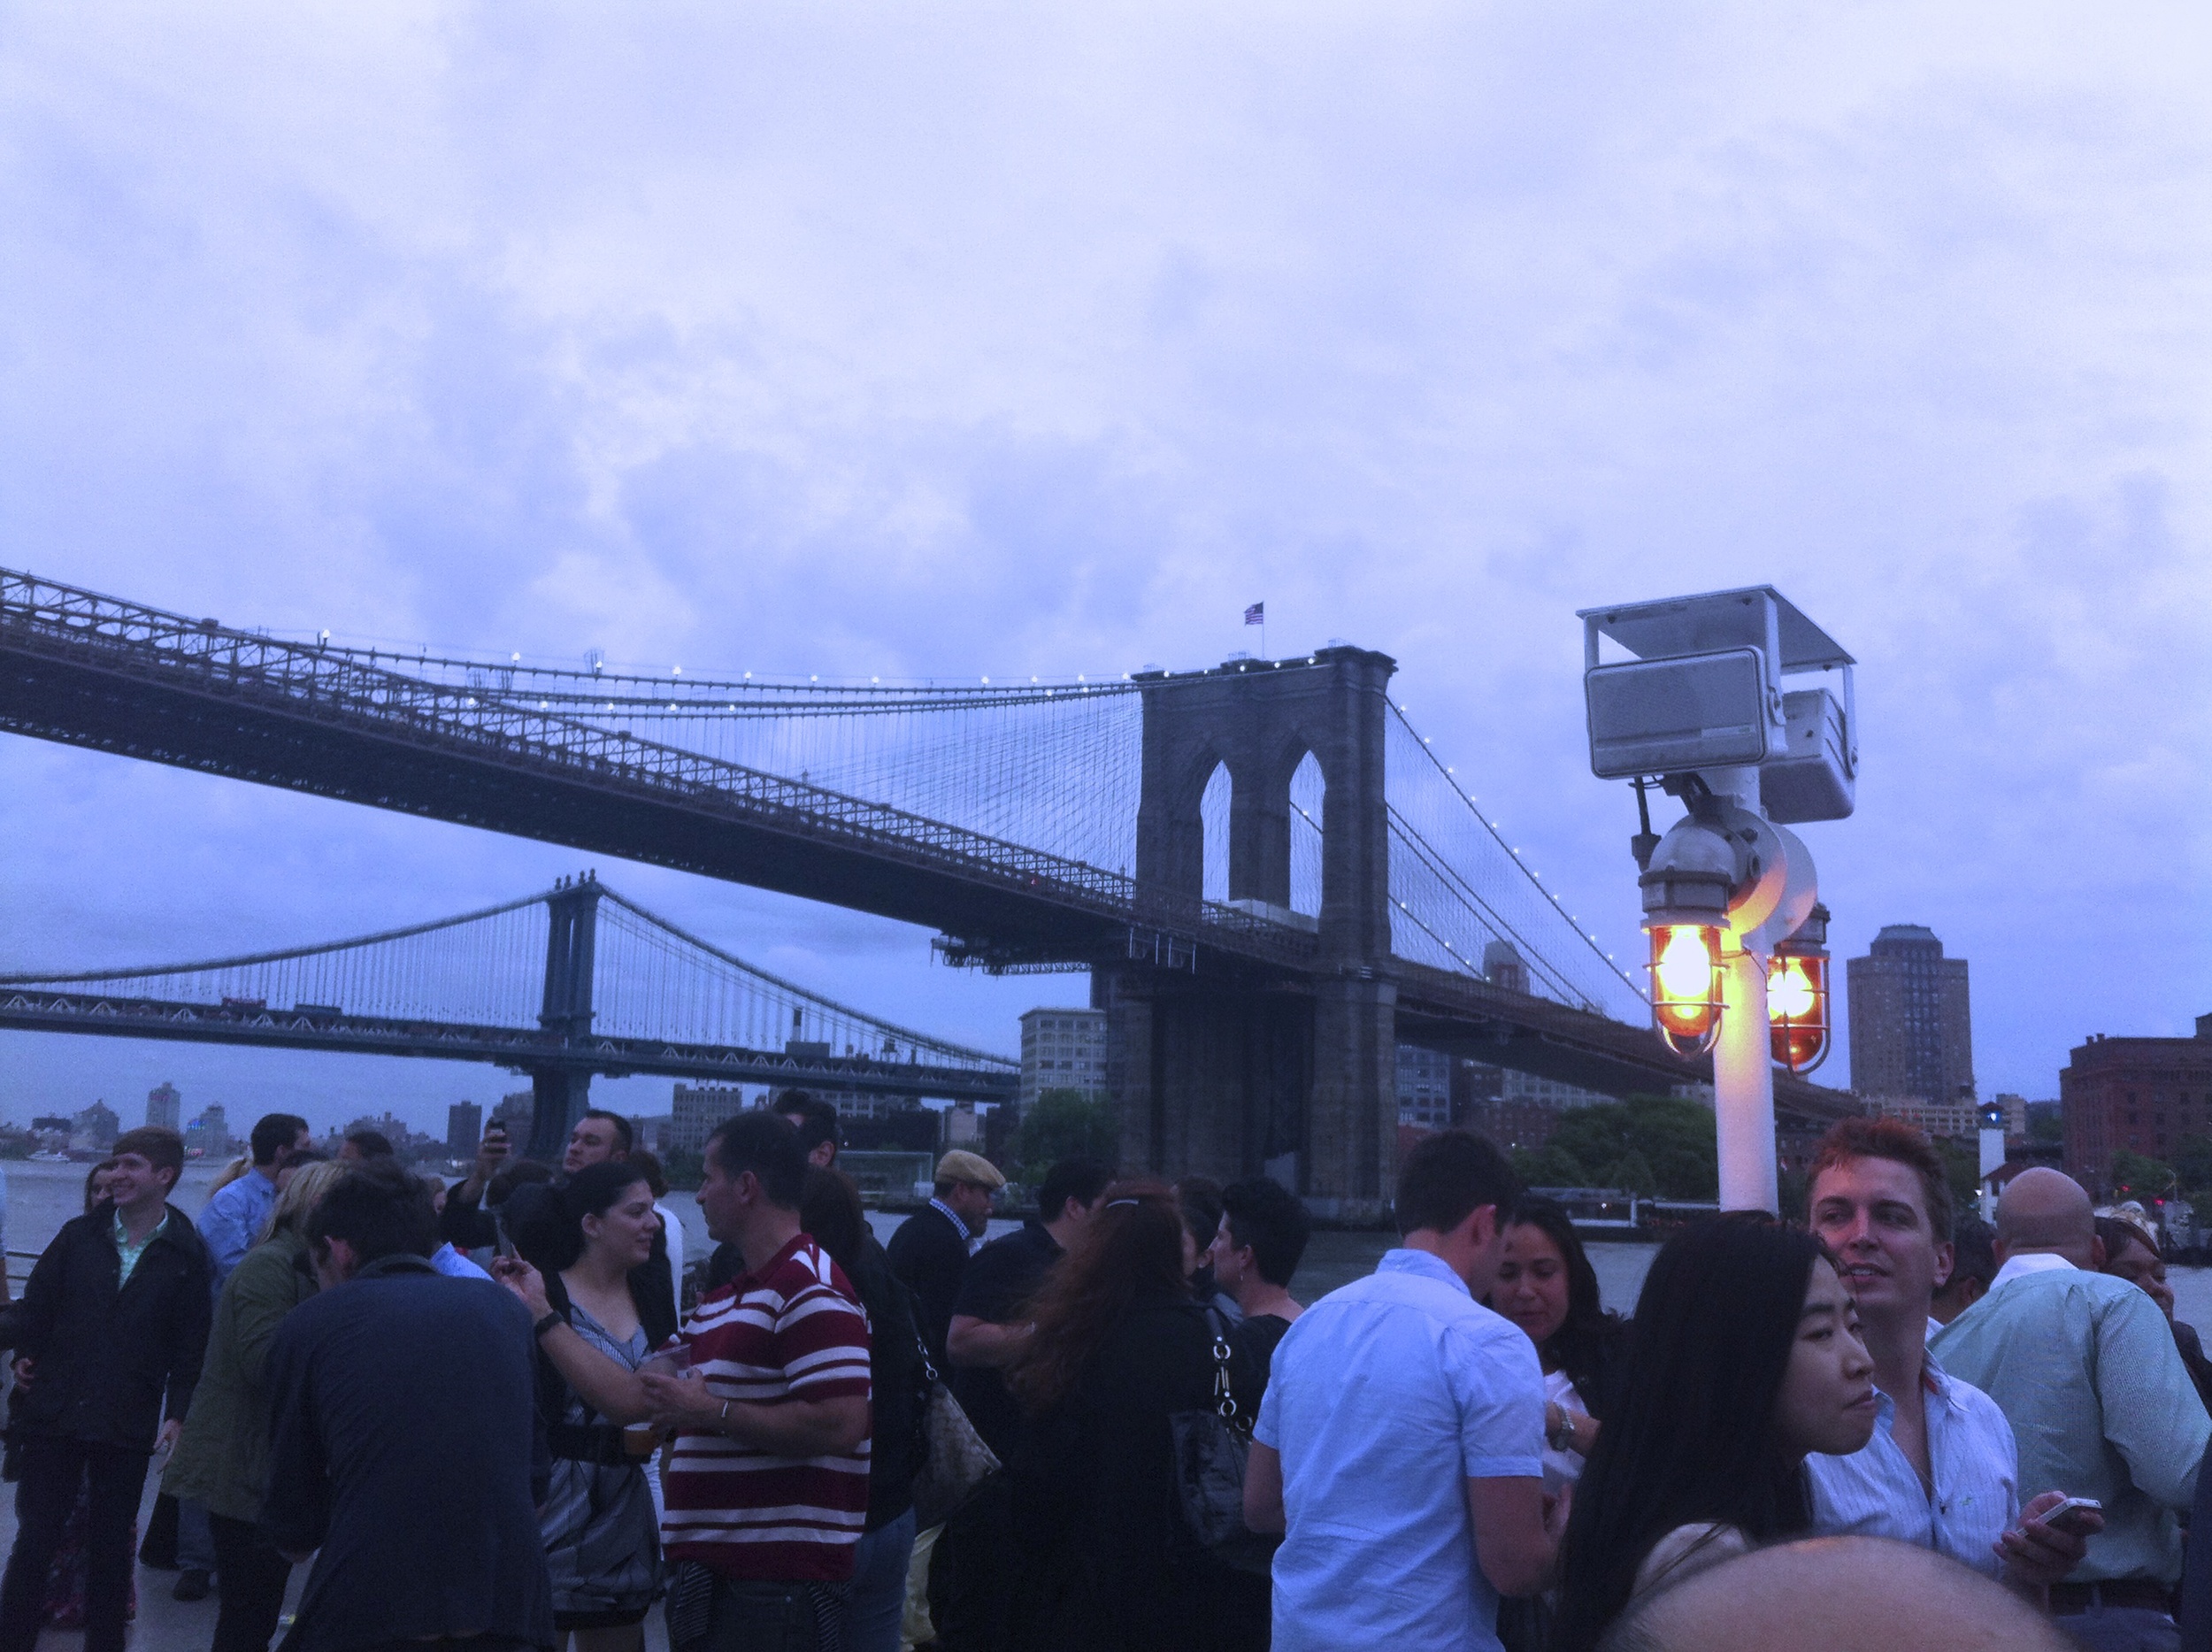 An event in Brooklyn, just by the East River